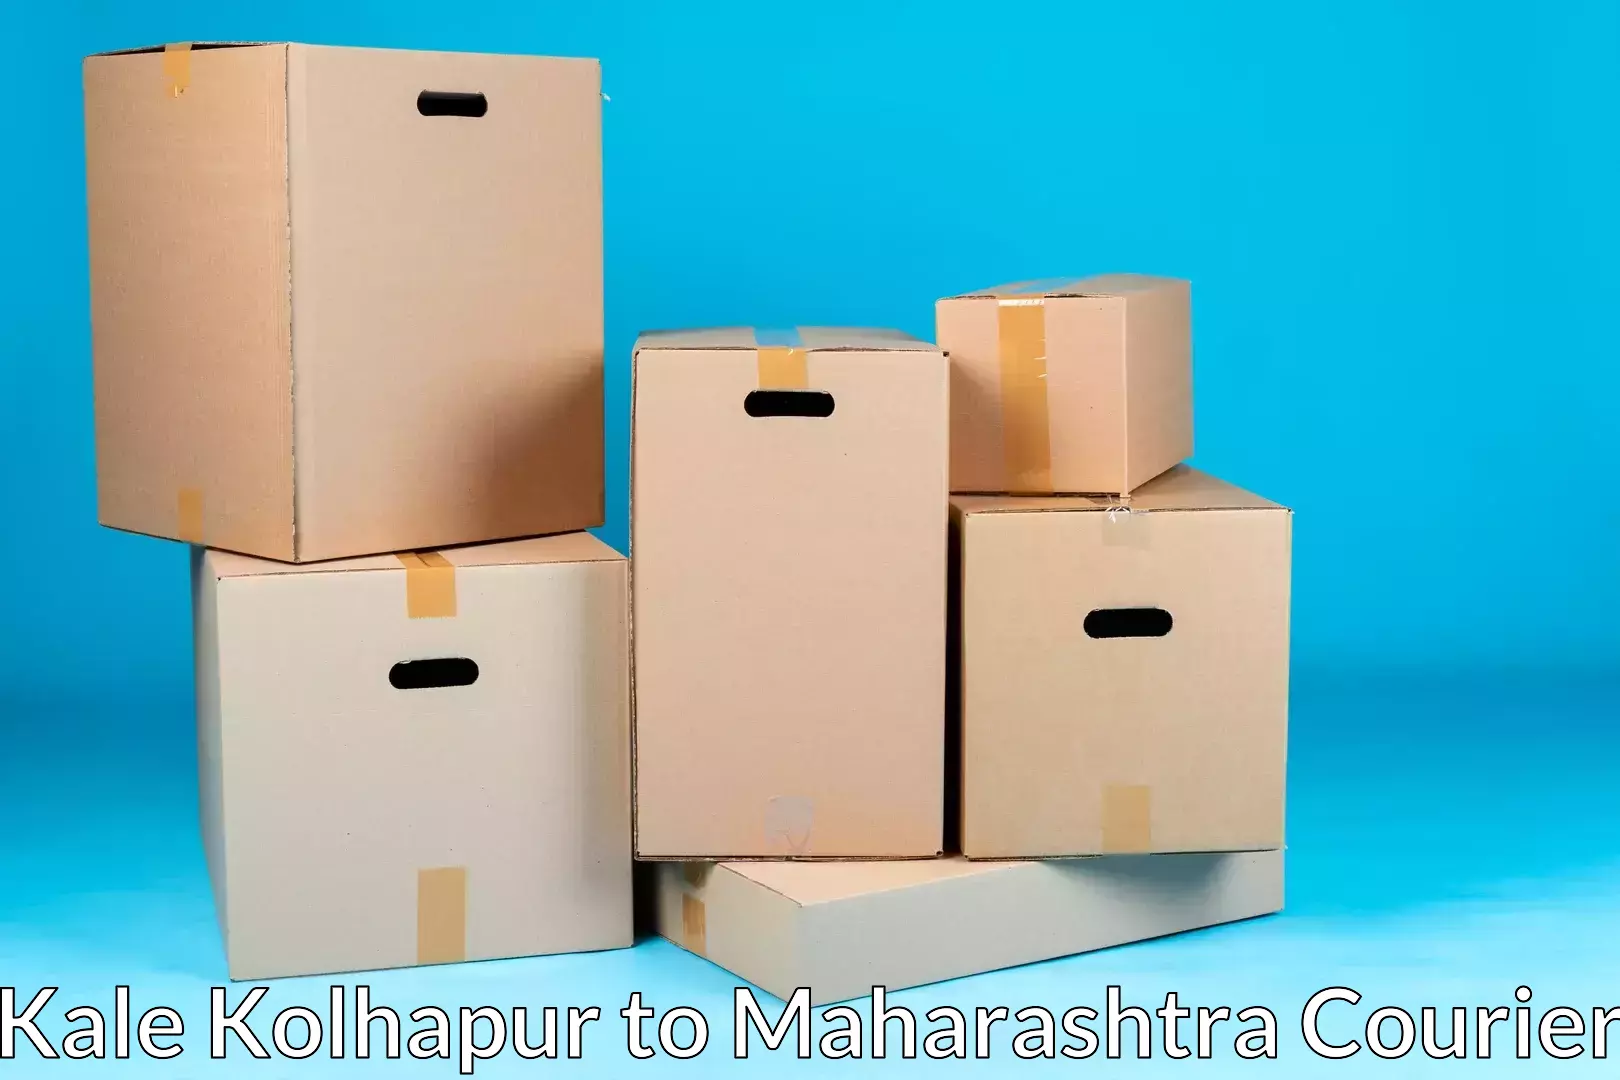 Furniture relocation services in Kale Kolhapur to Maharashtra